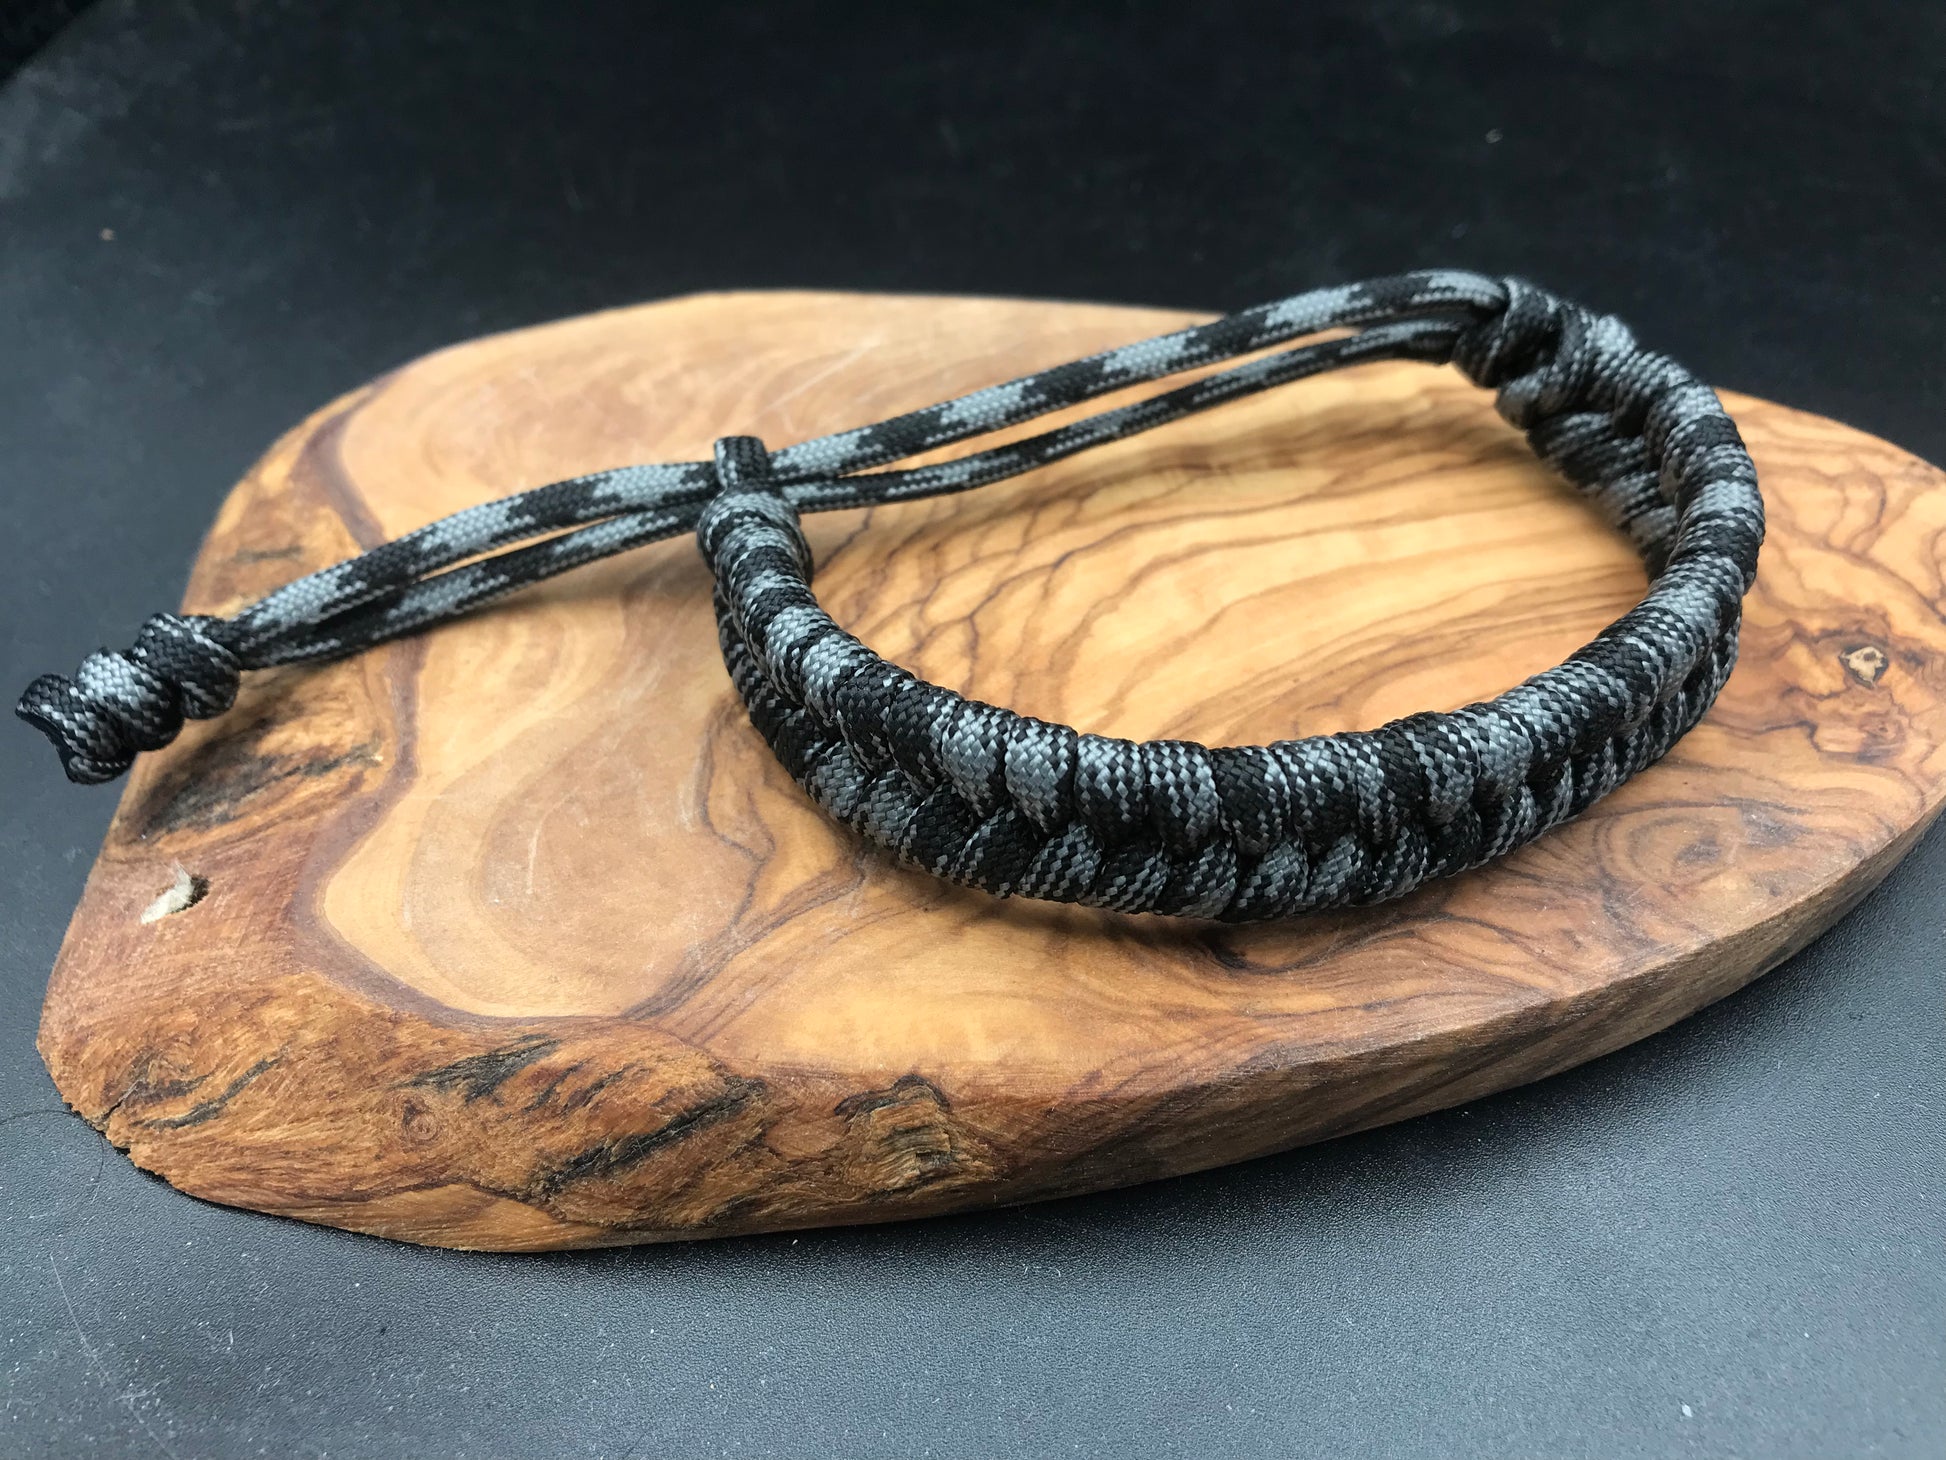 Handmade Paracord Fishtail weave bracelet in graphite grey and black colour